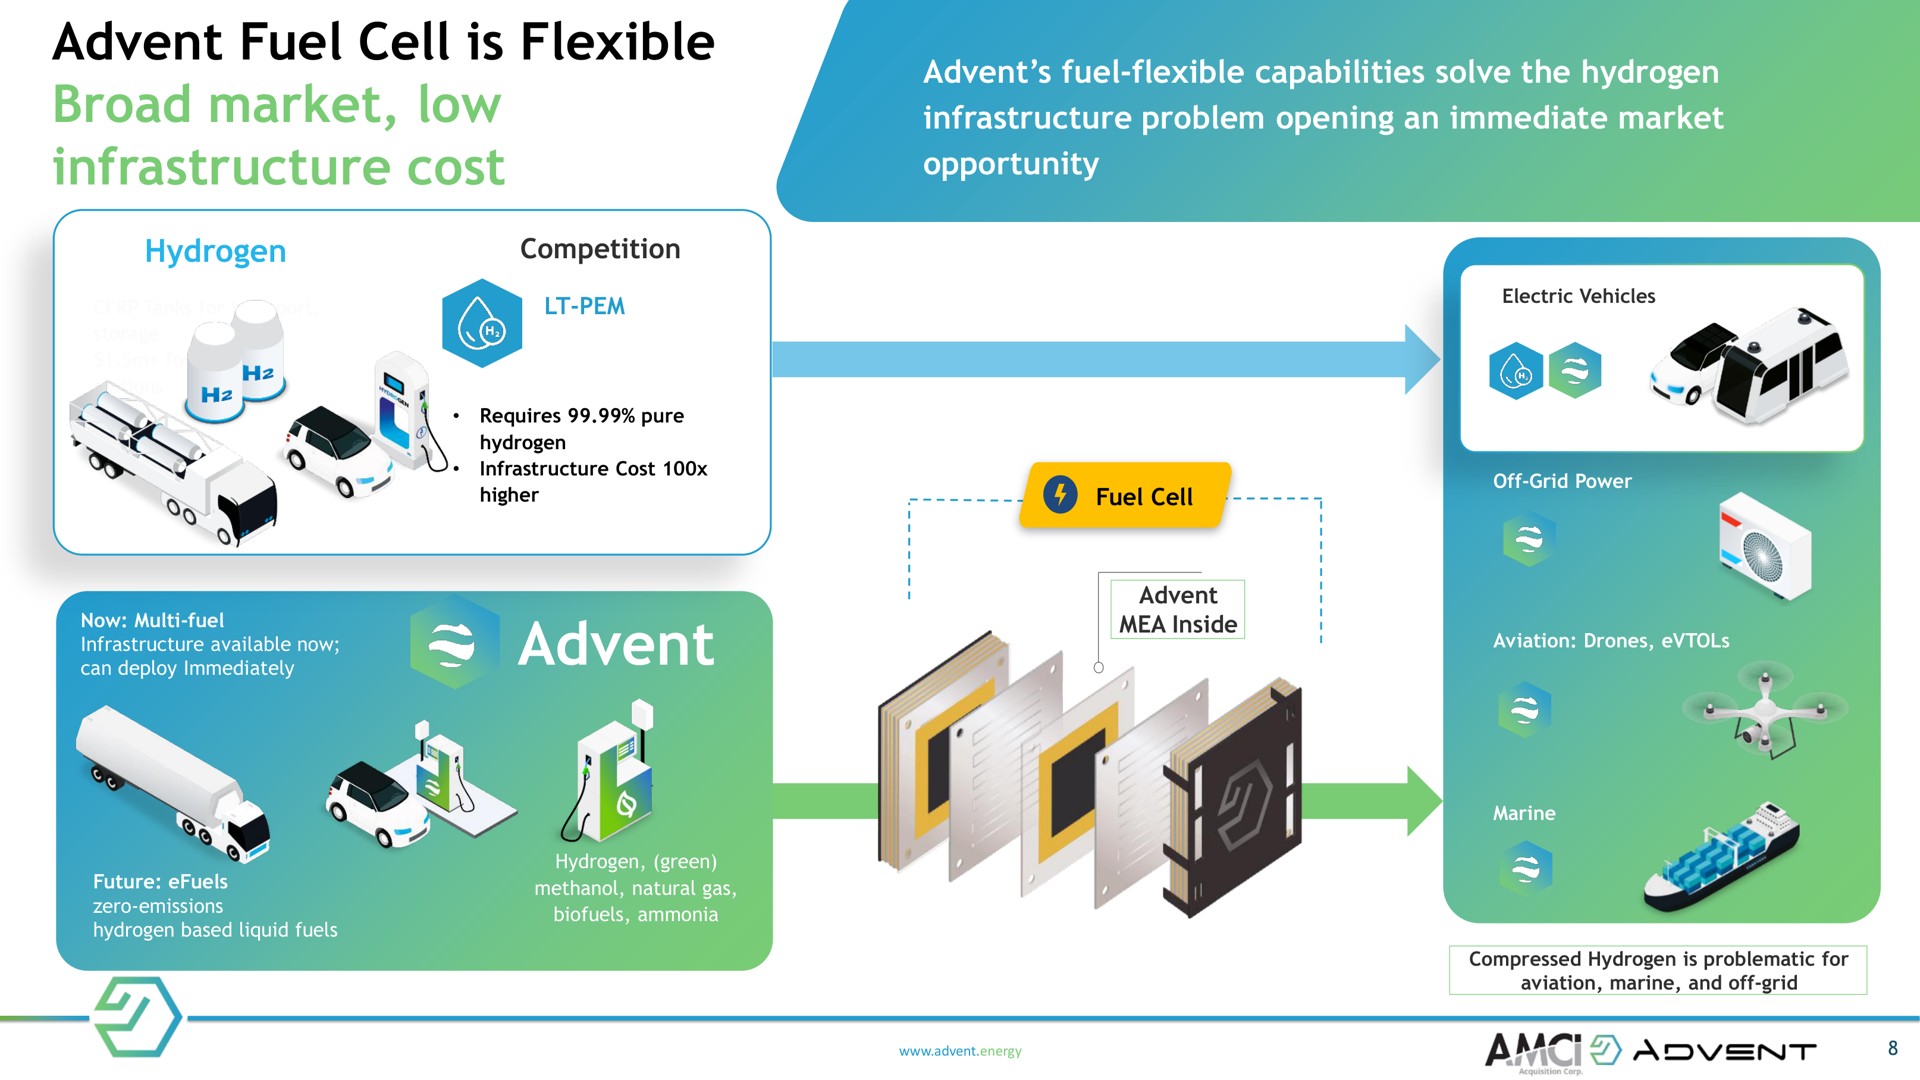 fuel cell is flexible broad market low infrastructure cost fuel flexible capabilities solve the hydrogen problem opening an immediate aln a hydrogen me competition a requires pure hydrogen higher now fuel available now can deploy immediately inside electric vehicles off grid power marine coe so hydrogen based liquid fuels hydrogen green natural gas ammonia energy compressed hydrogen problematic for aviation marine and off grid amt a acquisition cor | Advent